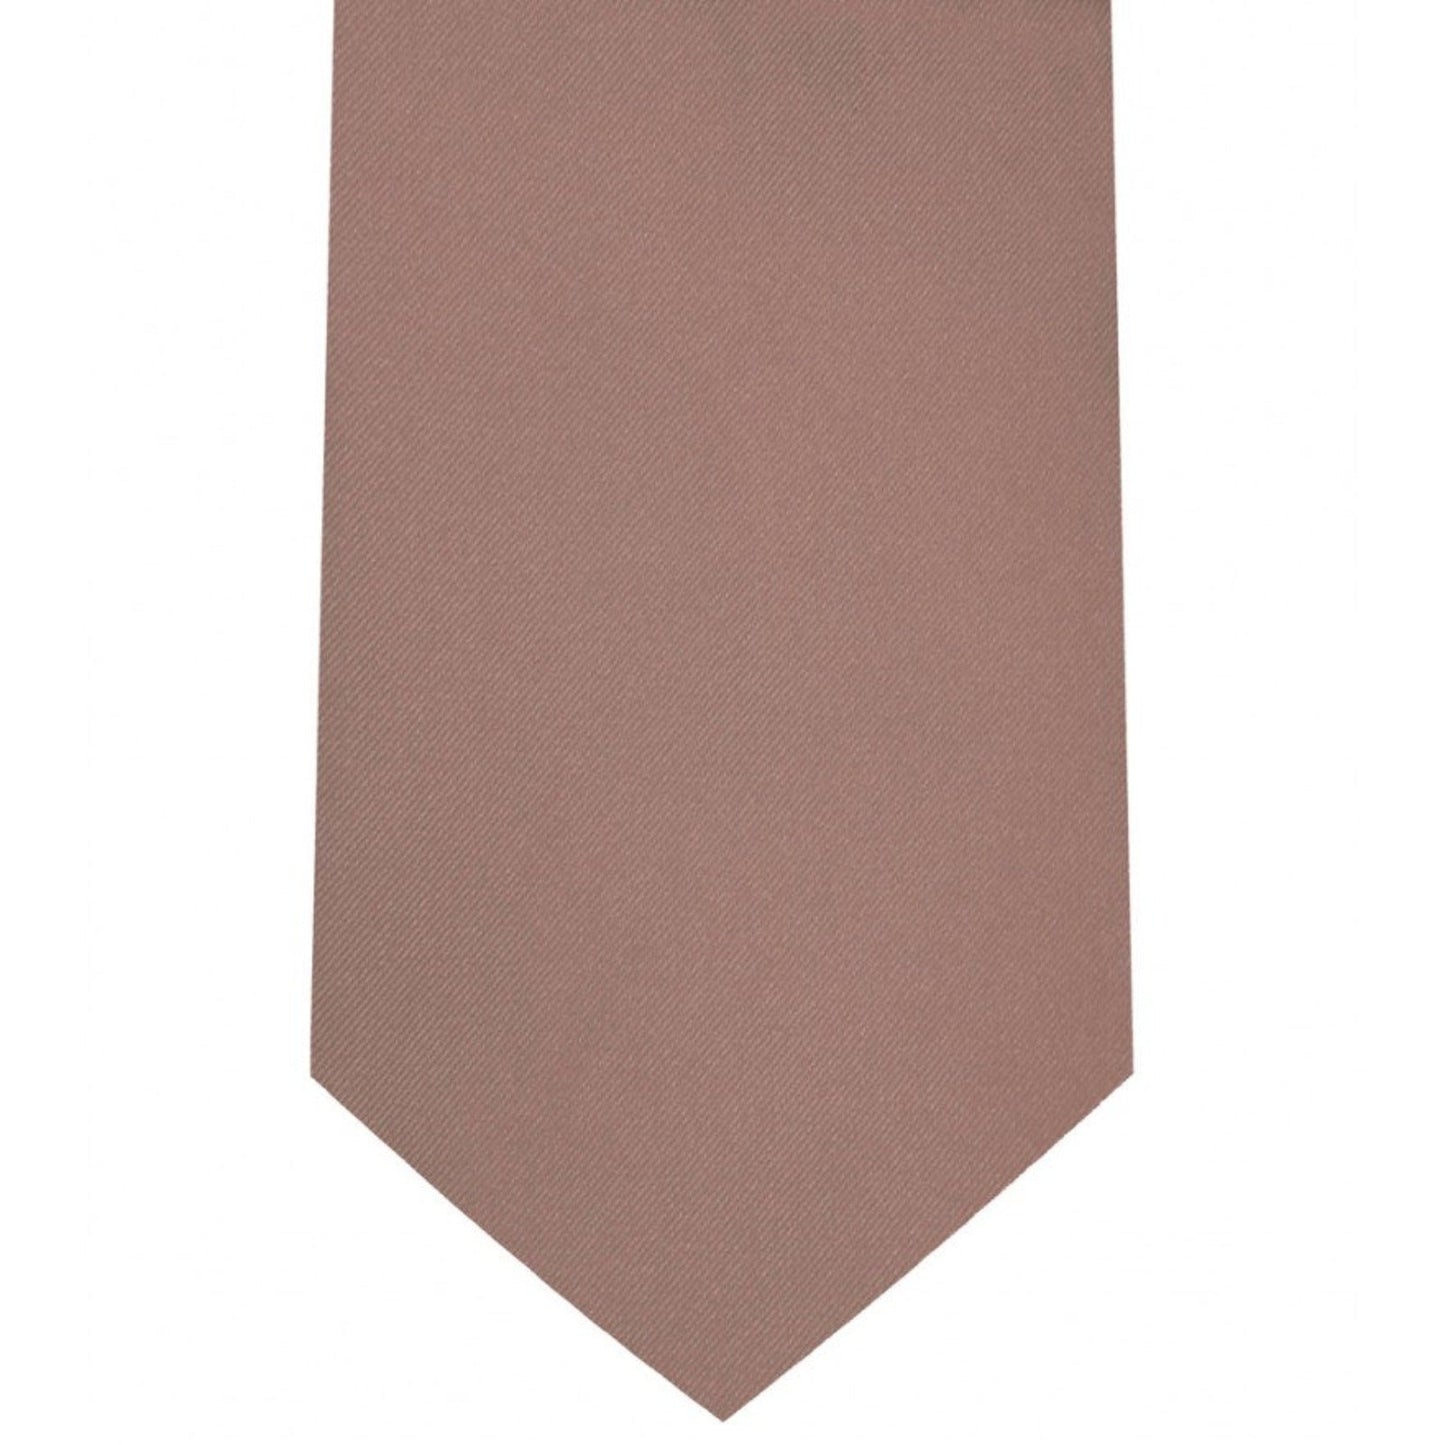 Classic Mauve Tie Regular width 3.5 inches With Matching Pocket Square | KCT Menswear 